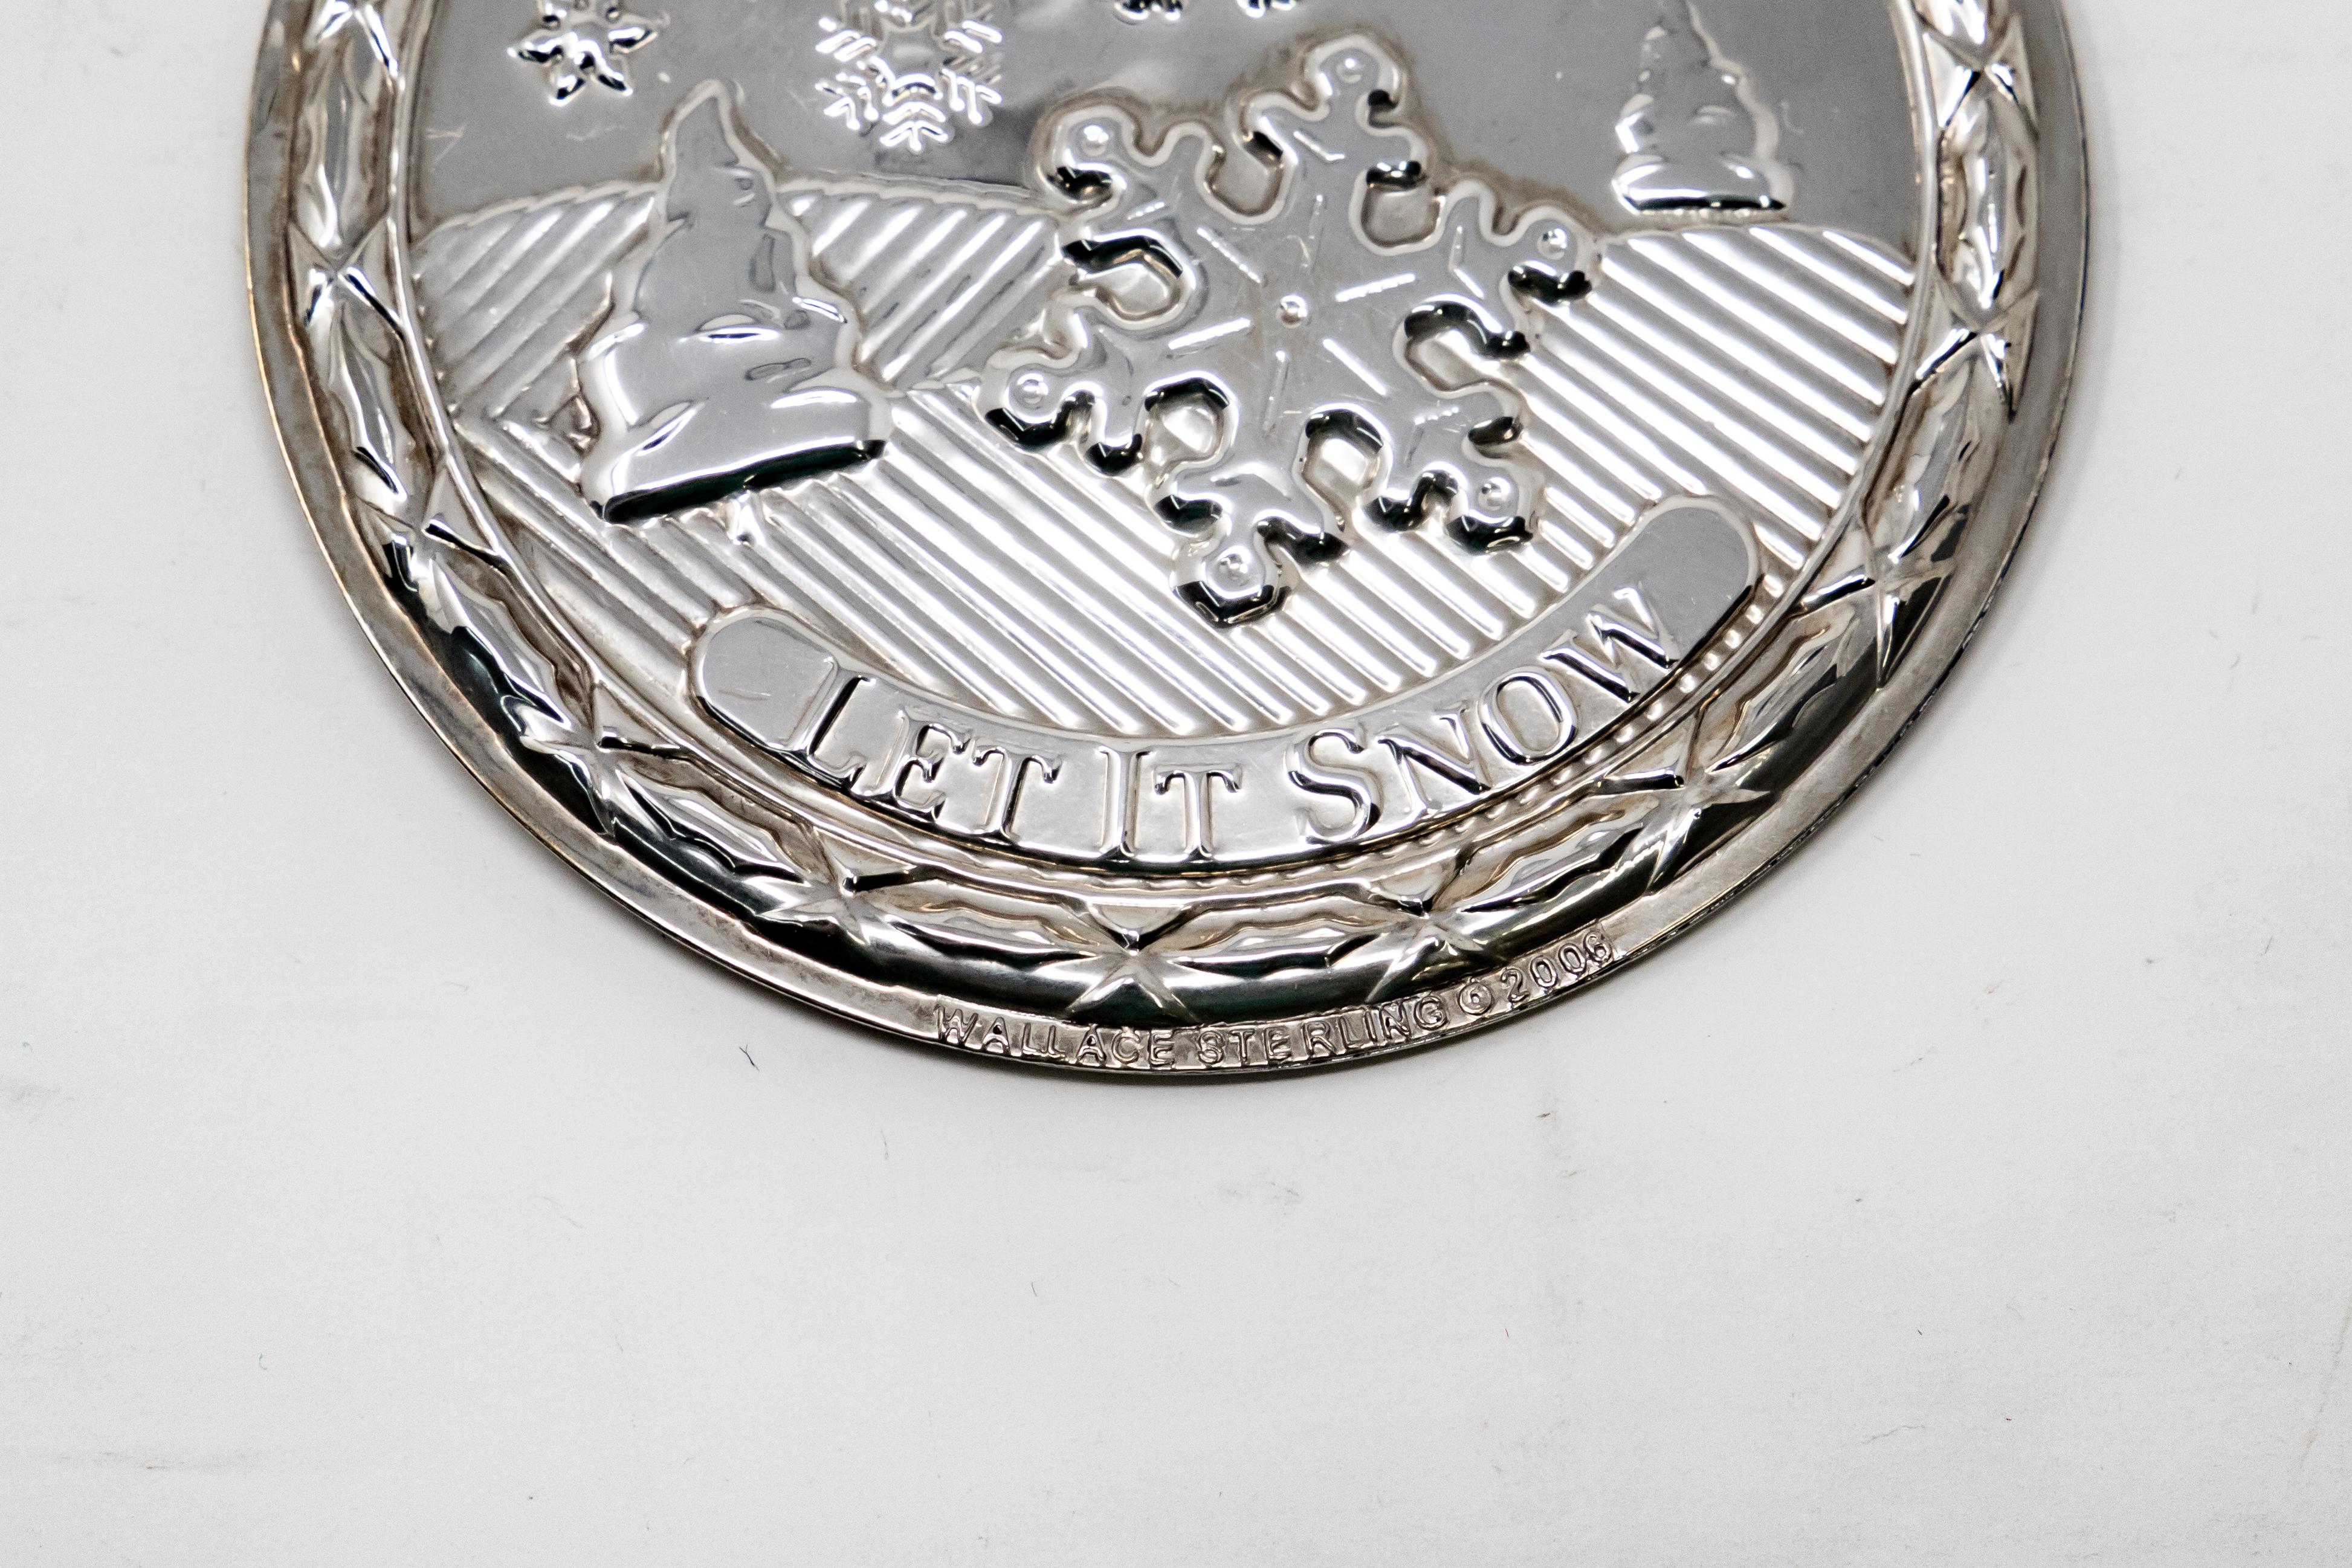 Offering a Wallace sterling silver ornament. The front depicts a landscape scene with snow falling and let it snow inscribed. The back is the same landscape with songs of Christmas inscribed. Signed Wallace Sterling with trademarks on the rim.